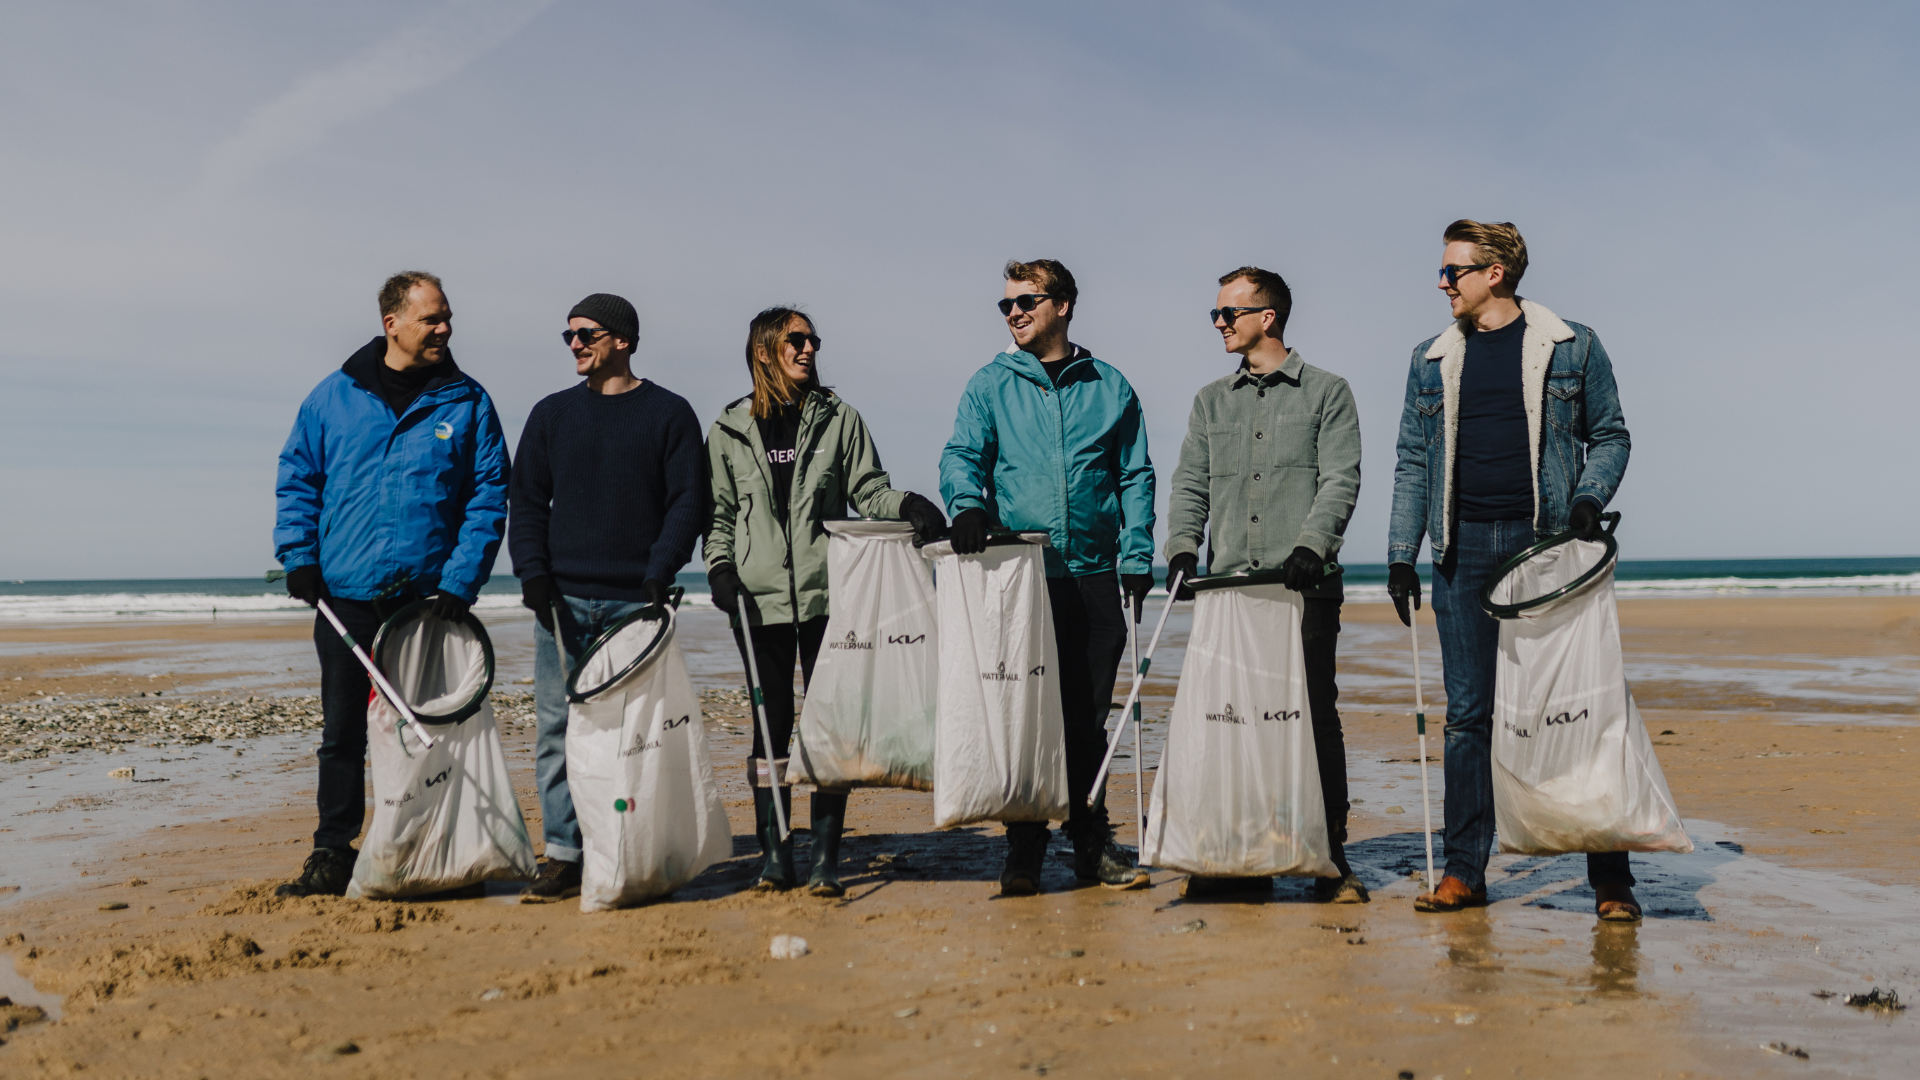 A group of people on a beach with litter picking equipment